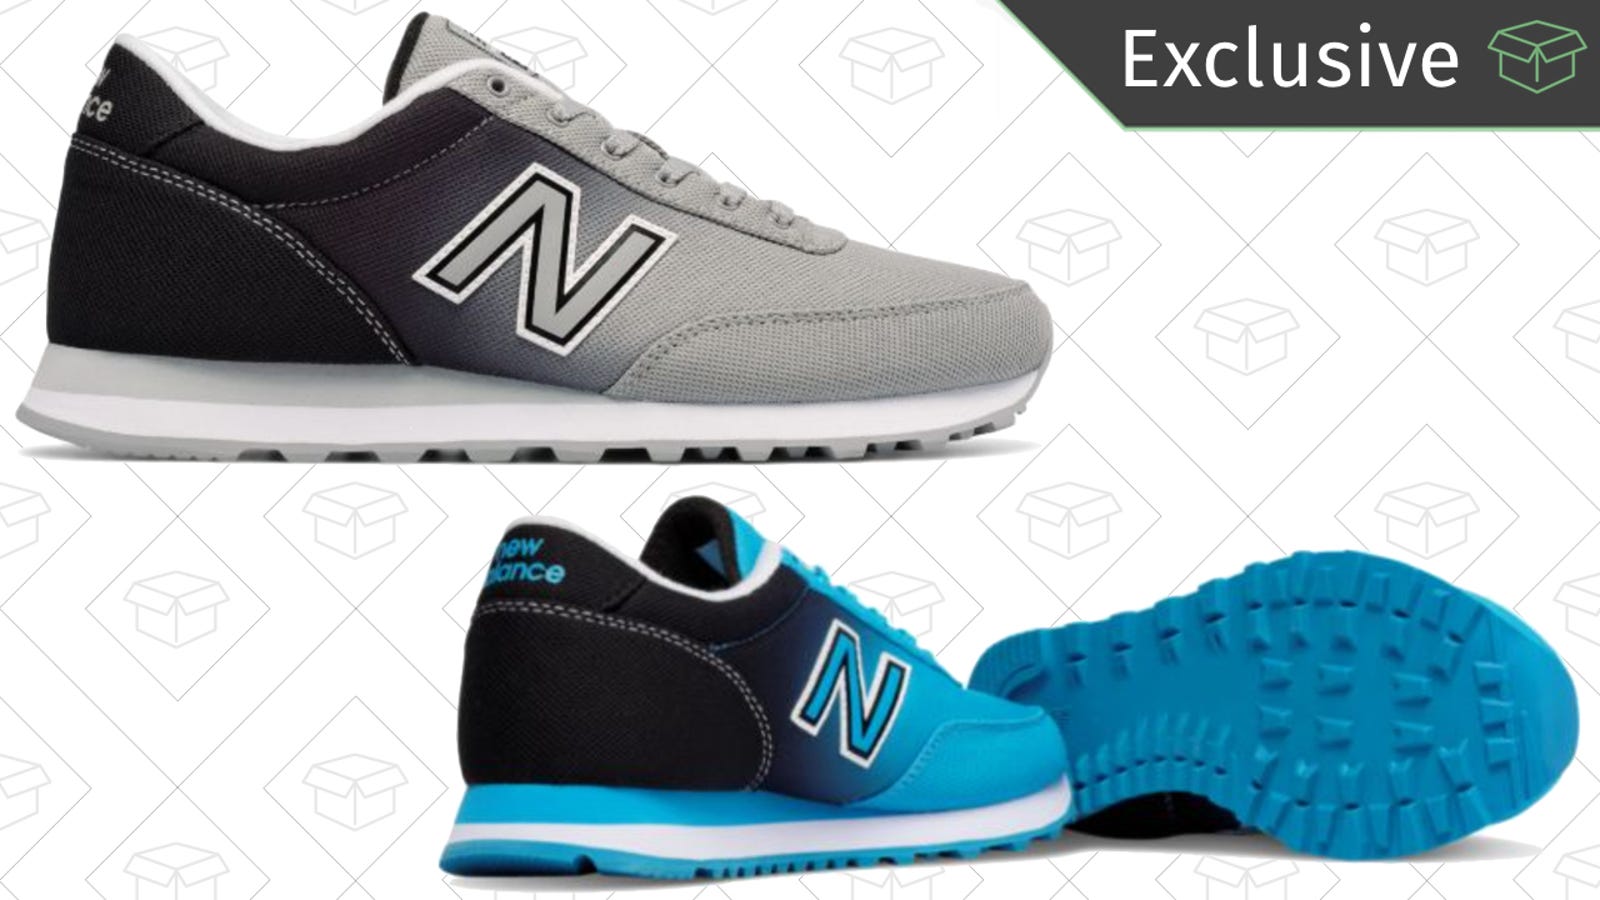 Lace Up Some New Balance 501s For Just $35 [Exclusive]